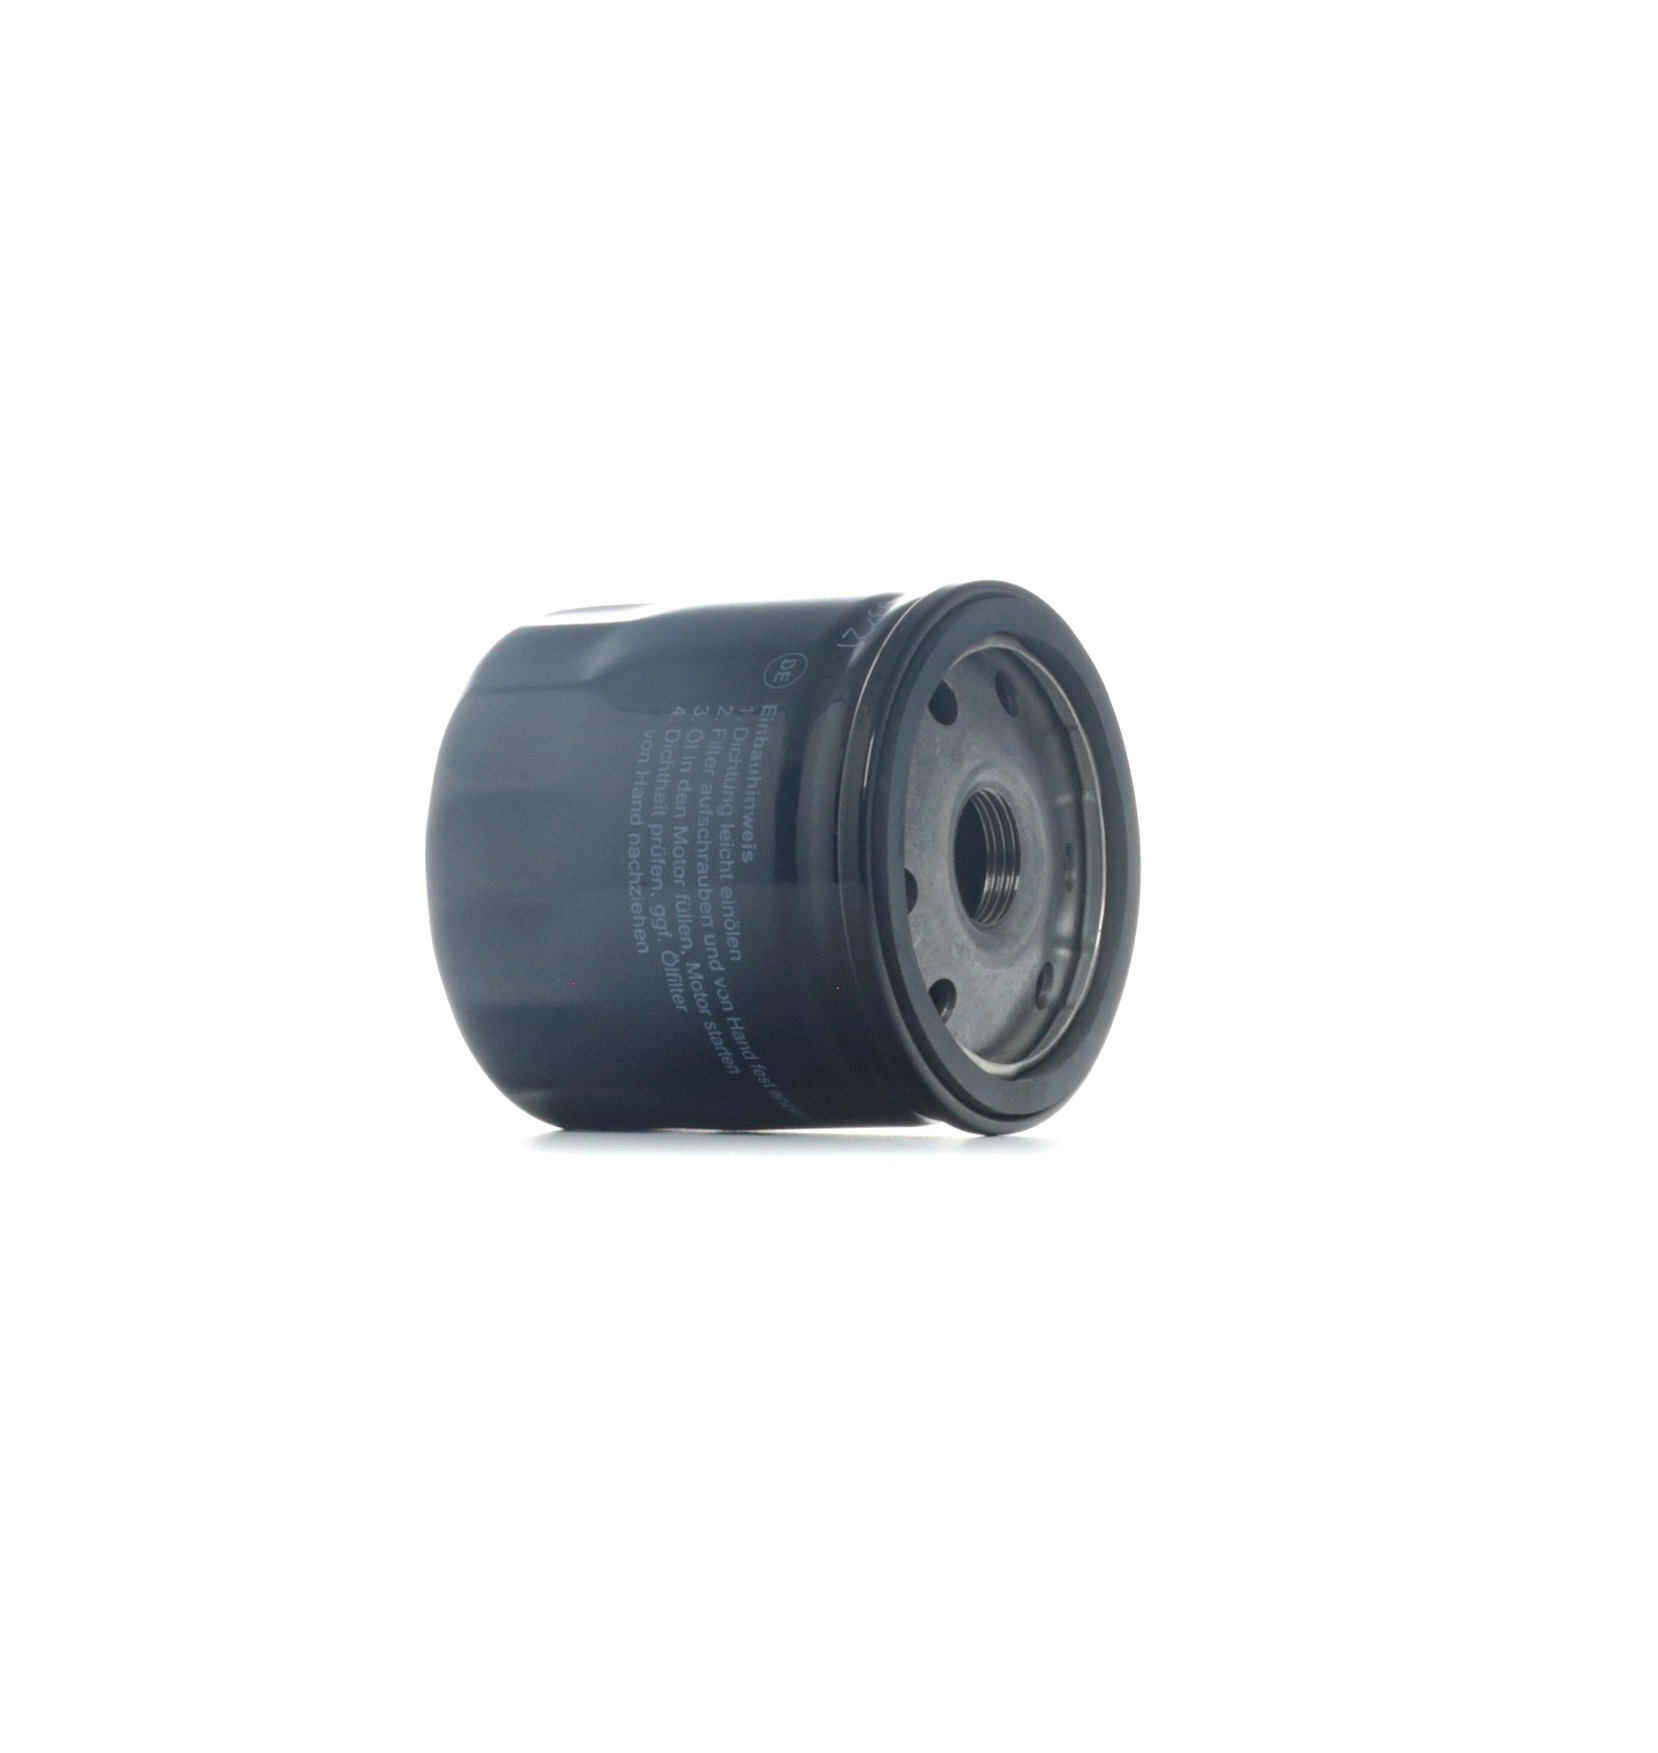 16-14 322 0011 MEYLE Oil filters MERCEDES-BENZ M20x1,5, ORIGINAL Quality, with one anti-return valve, Spin-on Filter